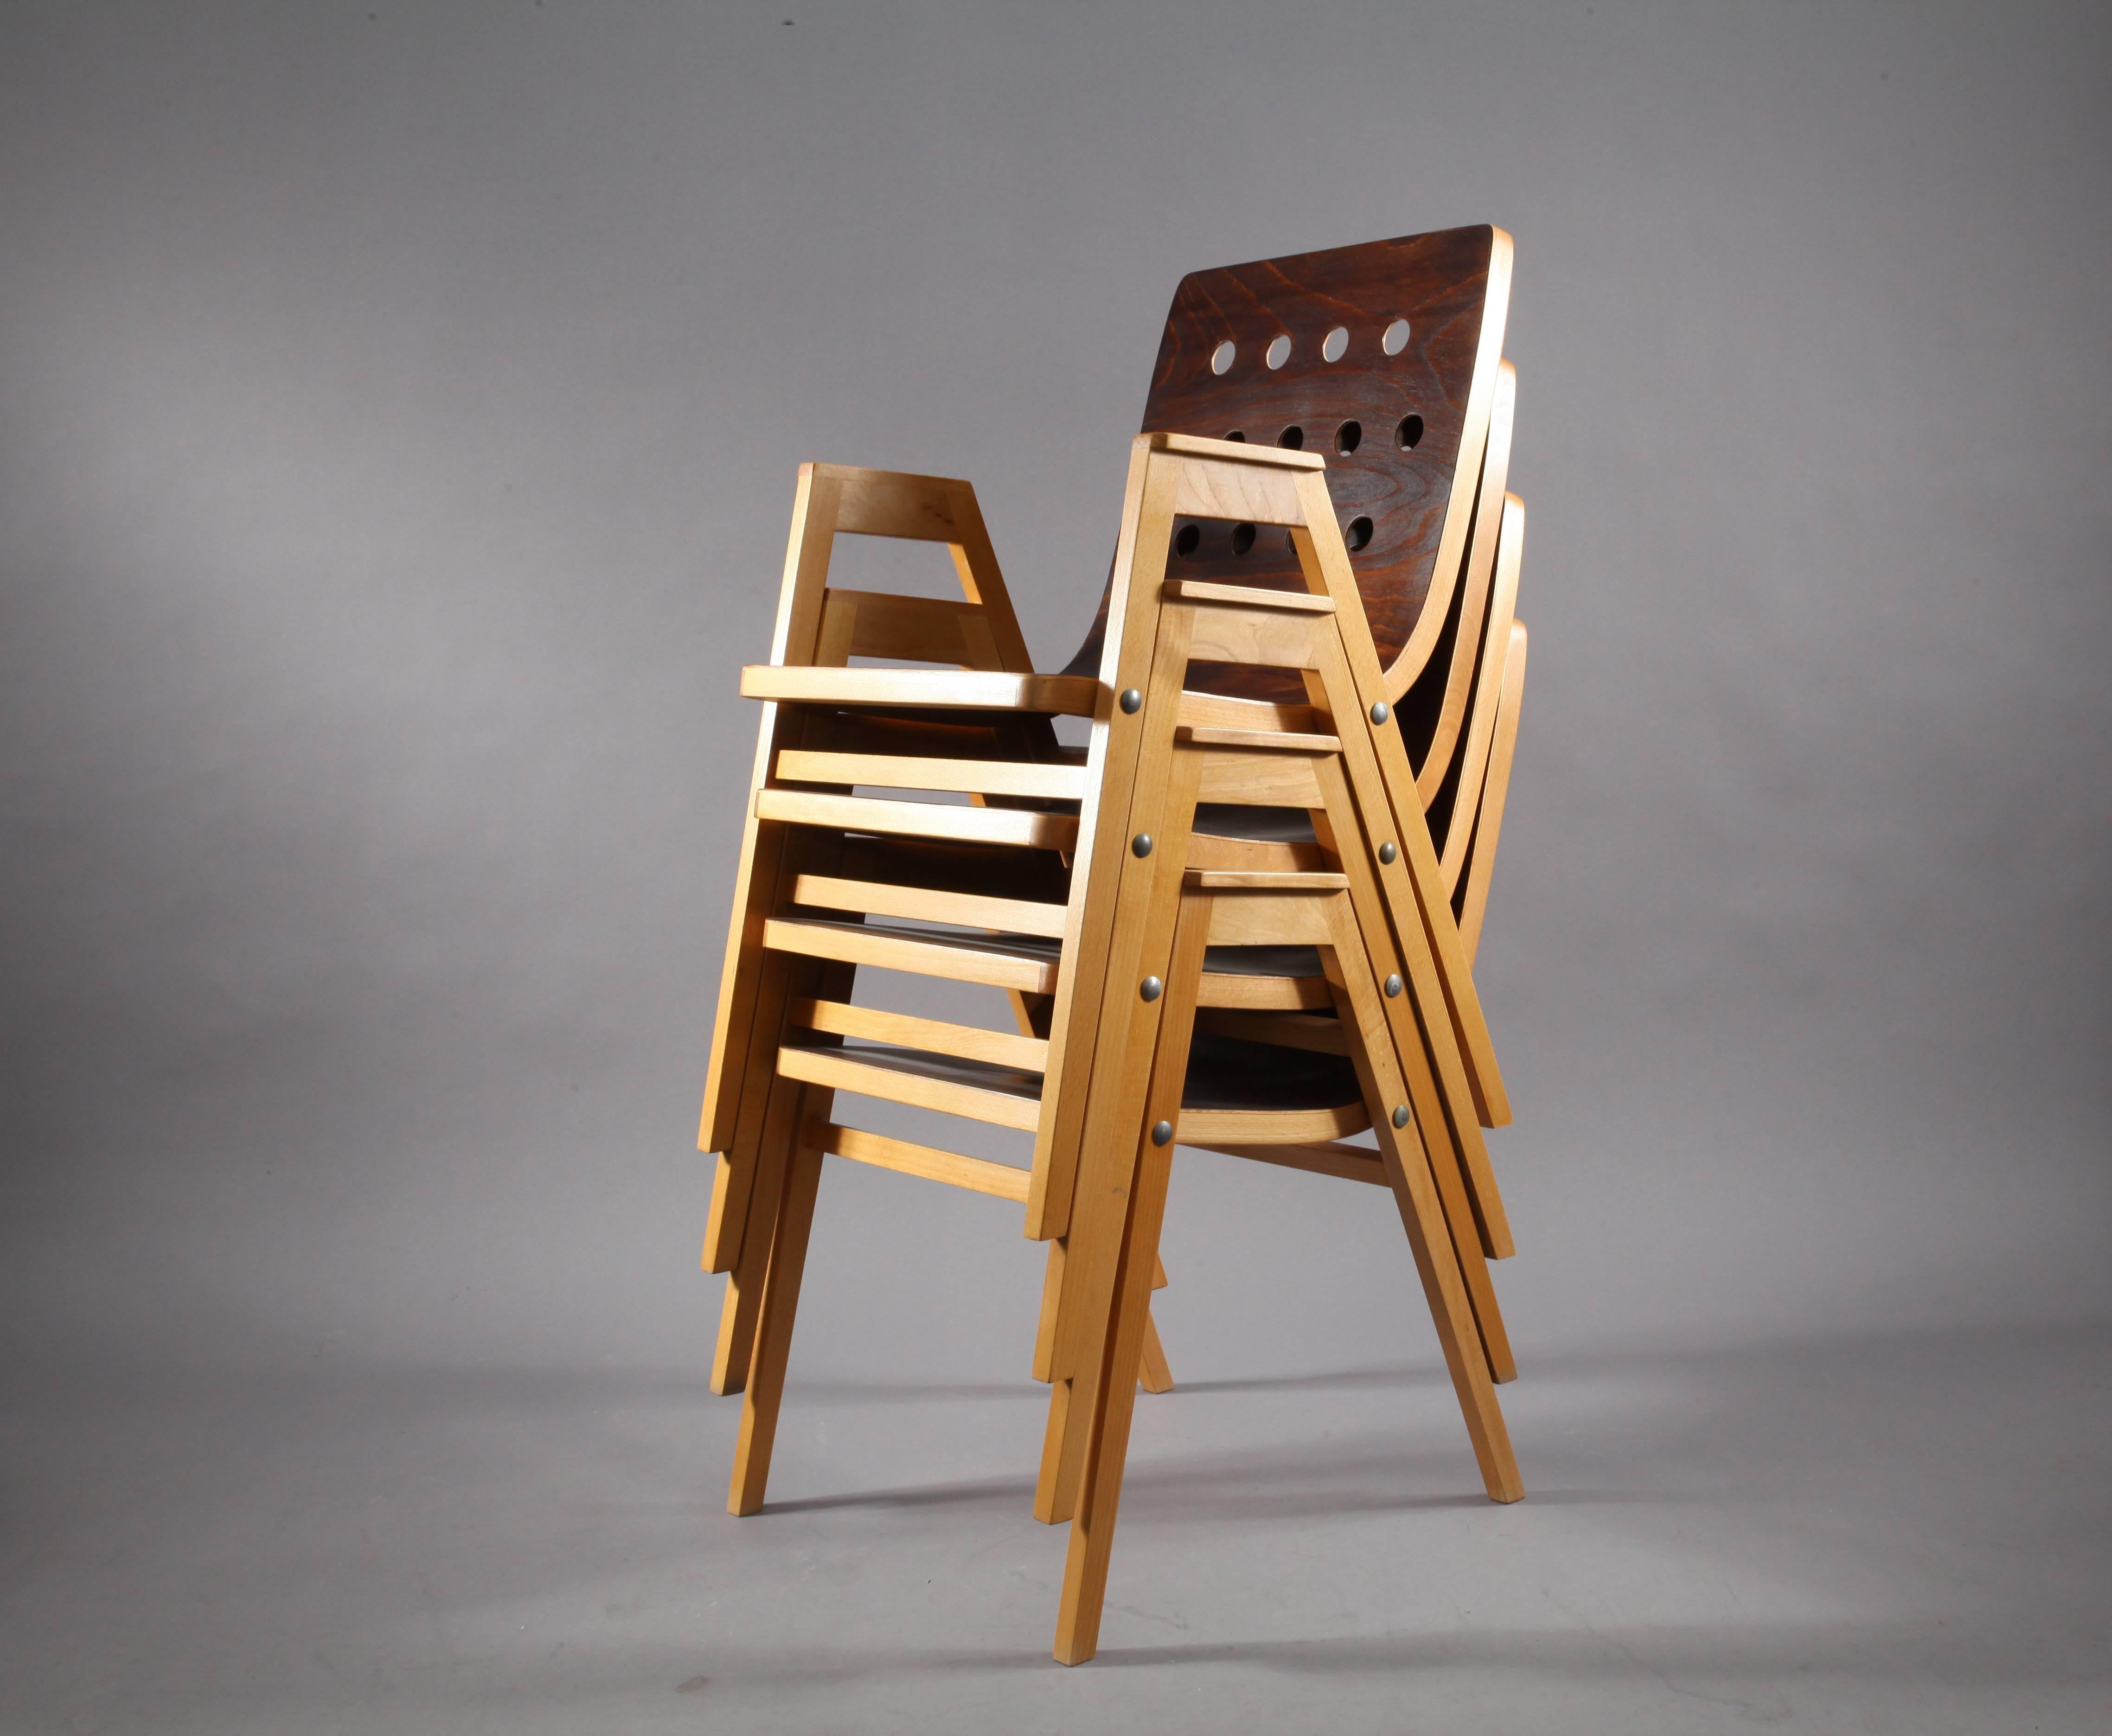 4 stacking chairs,
designed Roland Rainer,
manufacter A.E. Pollak
Vienna, 1956.
bentwood, beechwood.
 